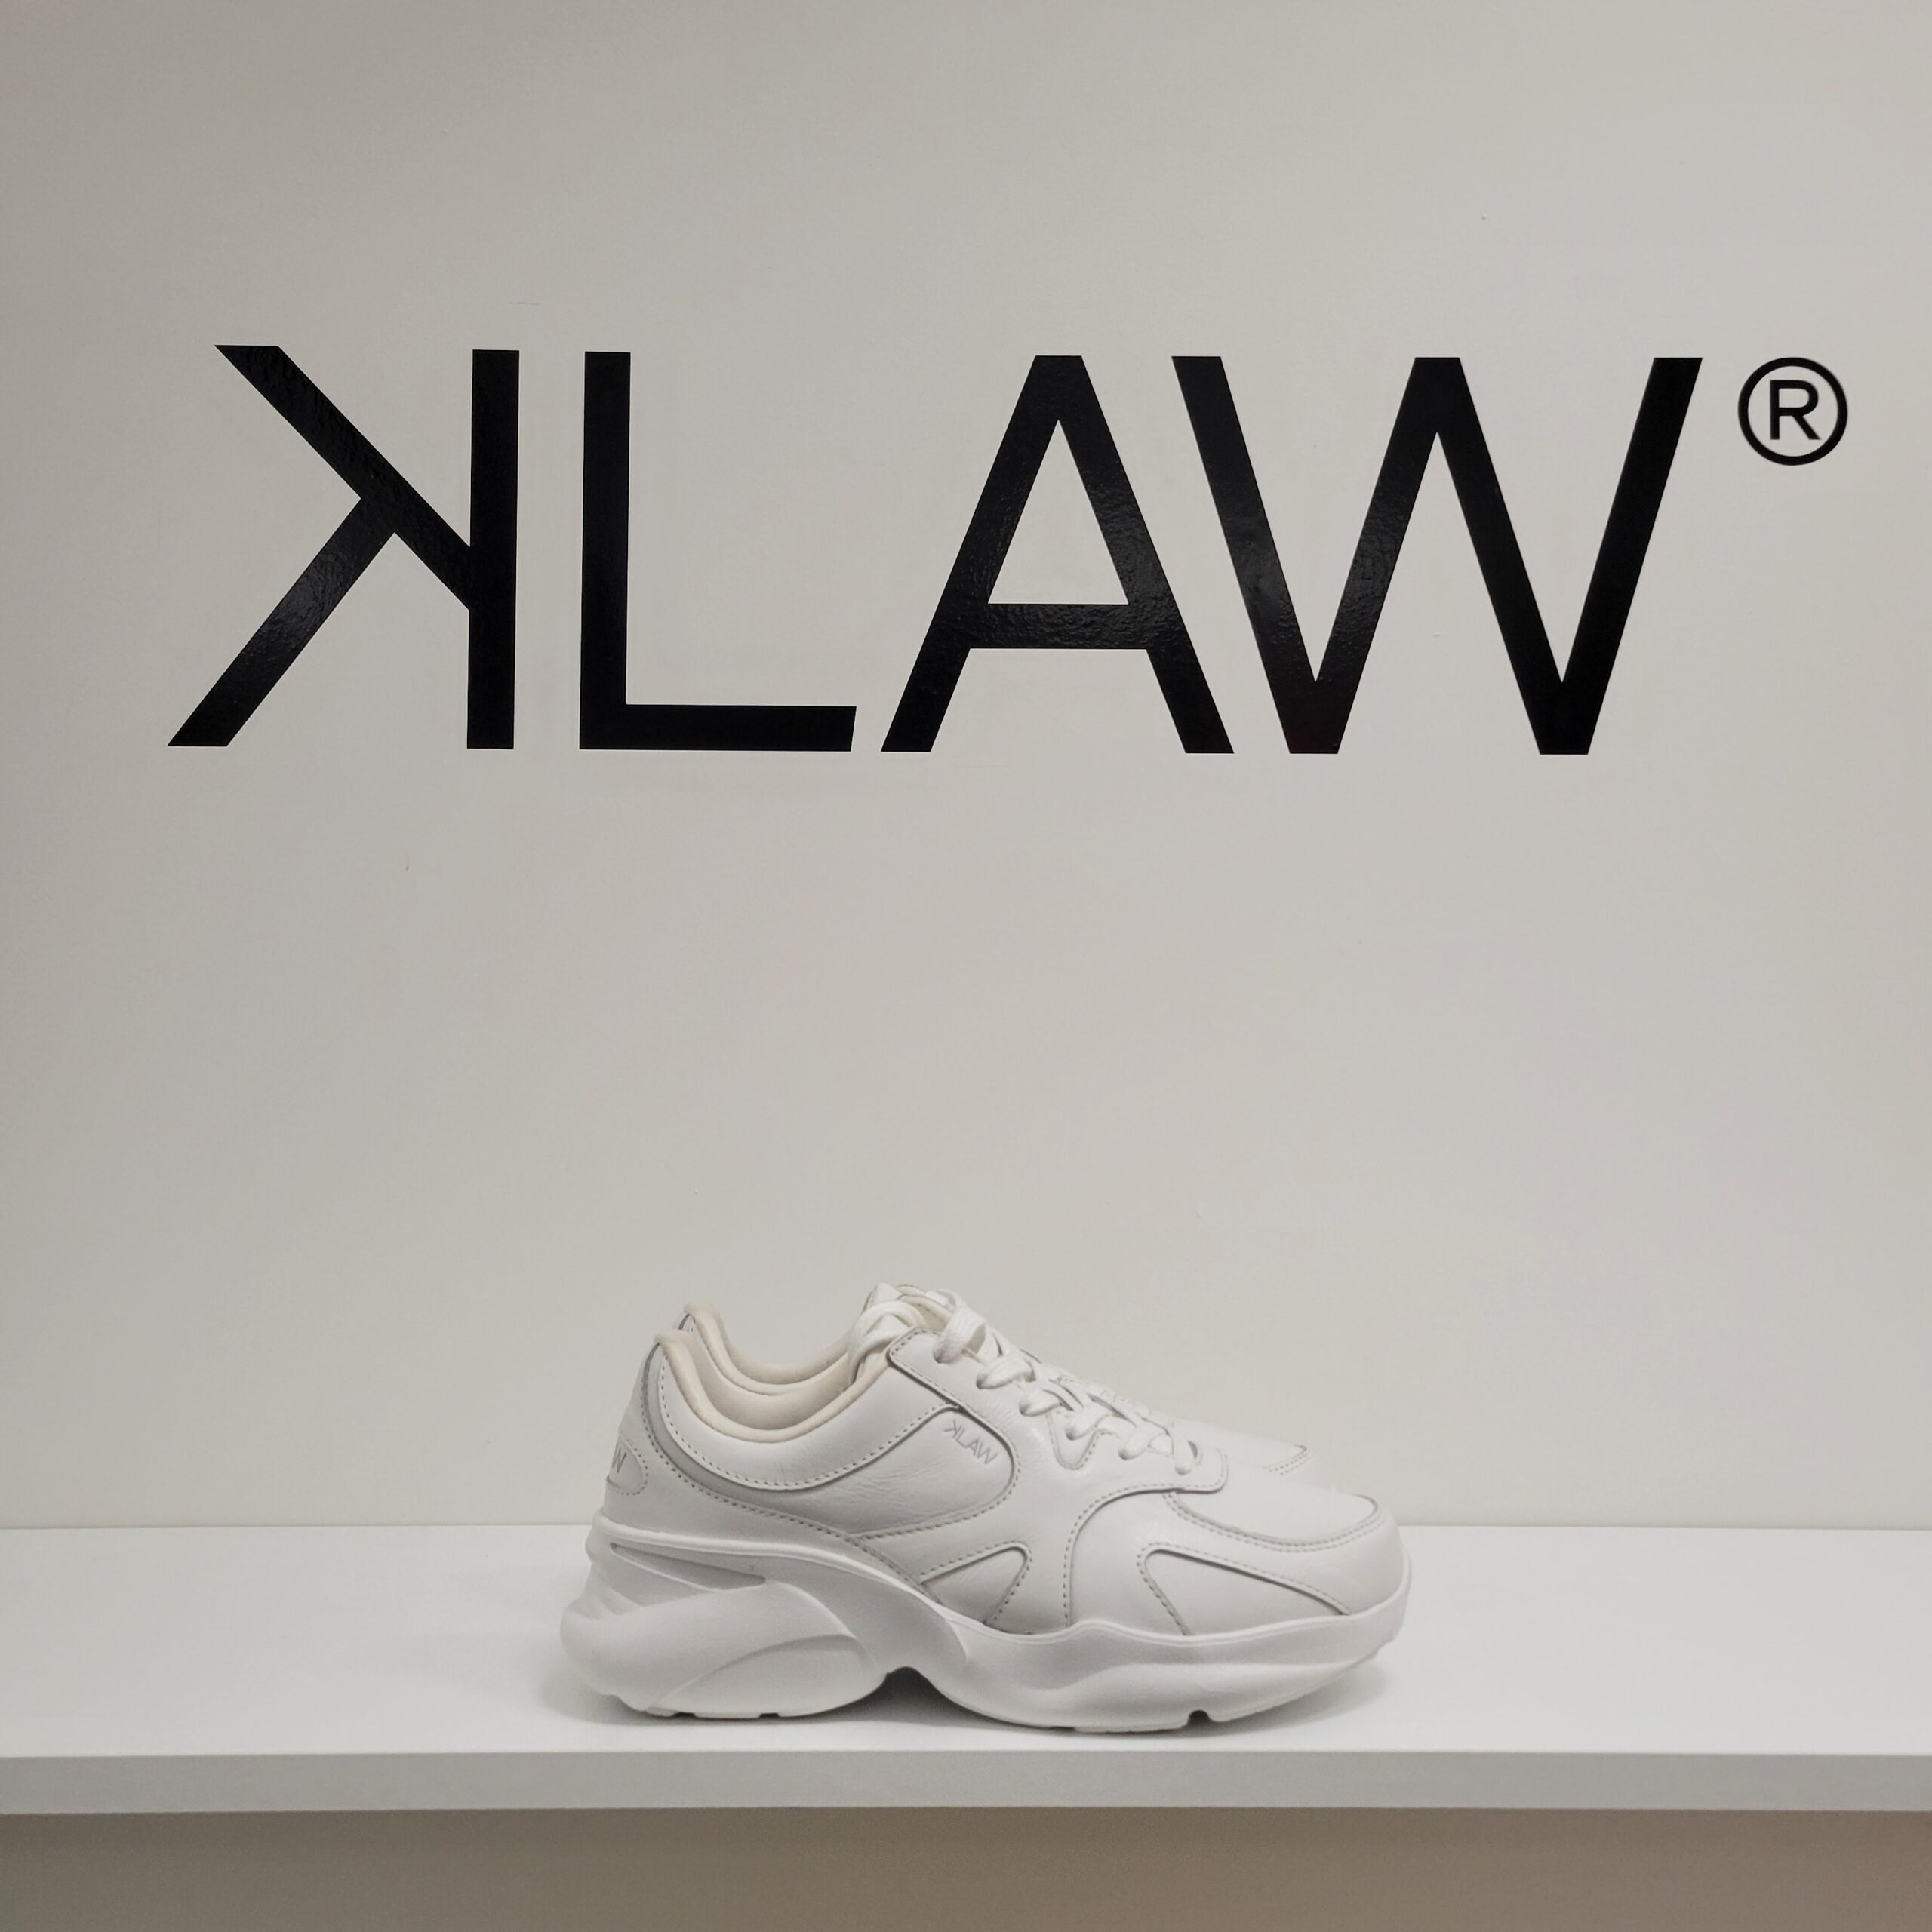 NYC DUMBO Improvement District - Small Business + Community - KLAW Footwear Inc.